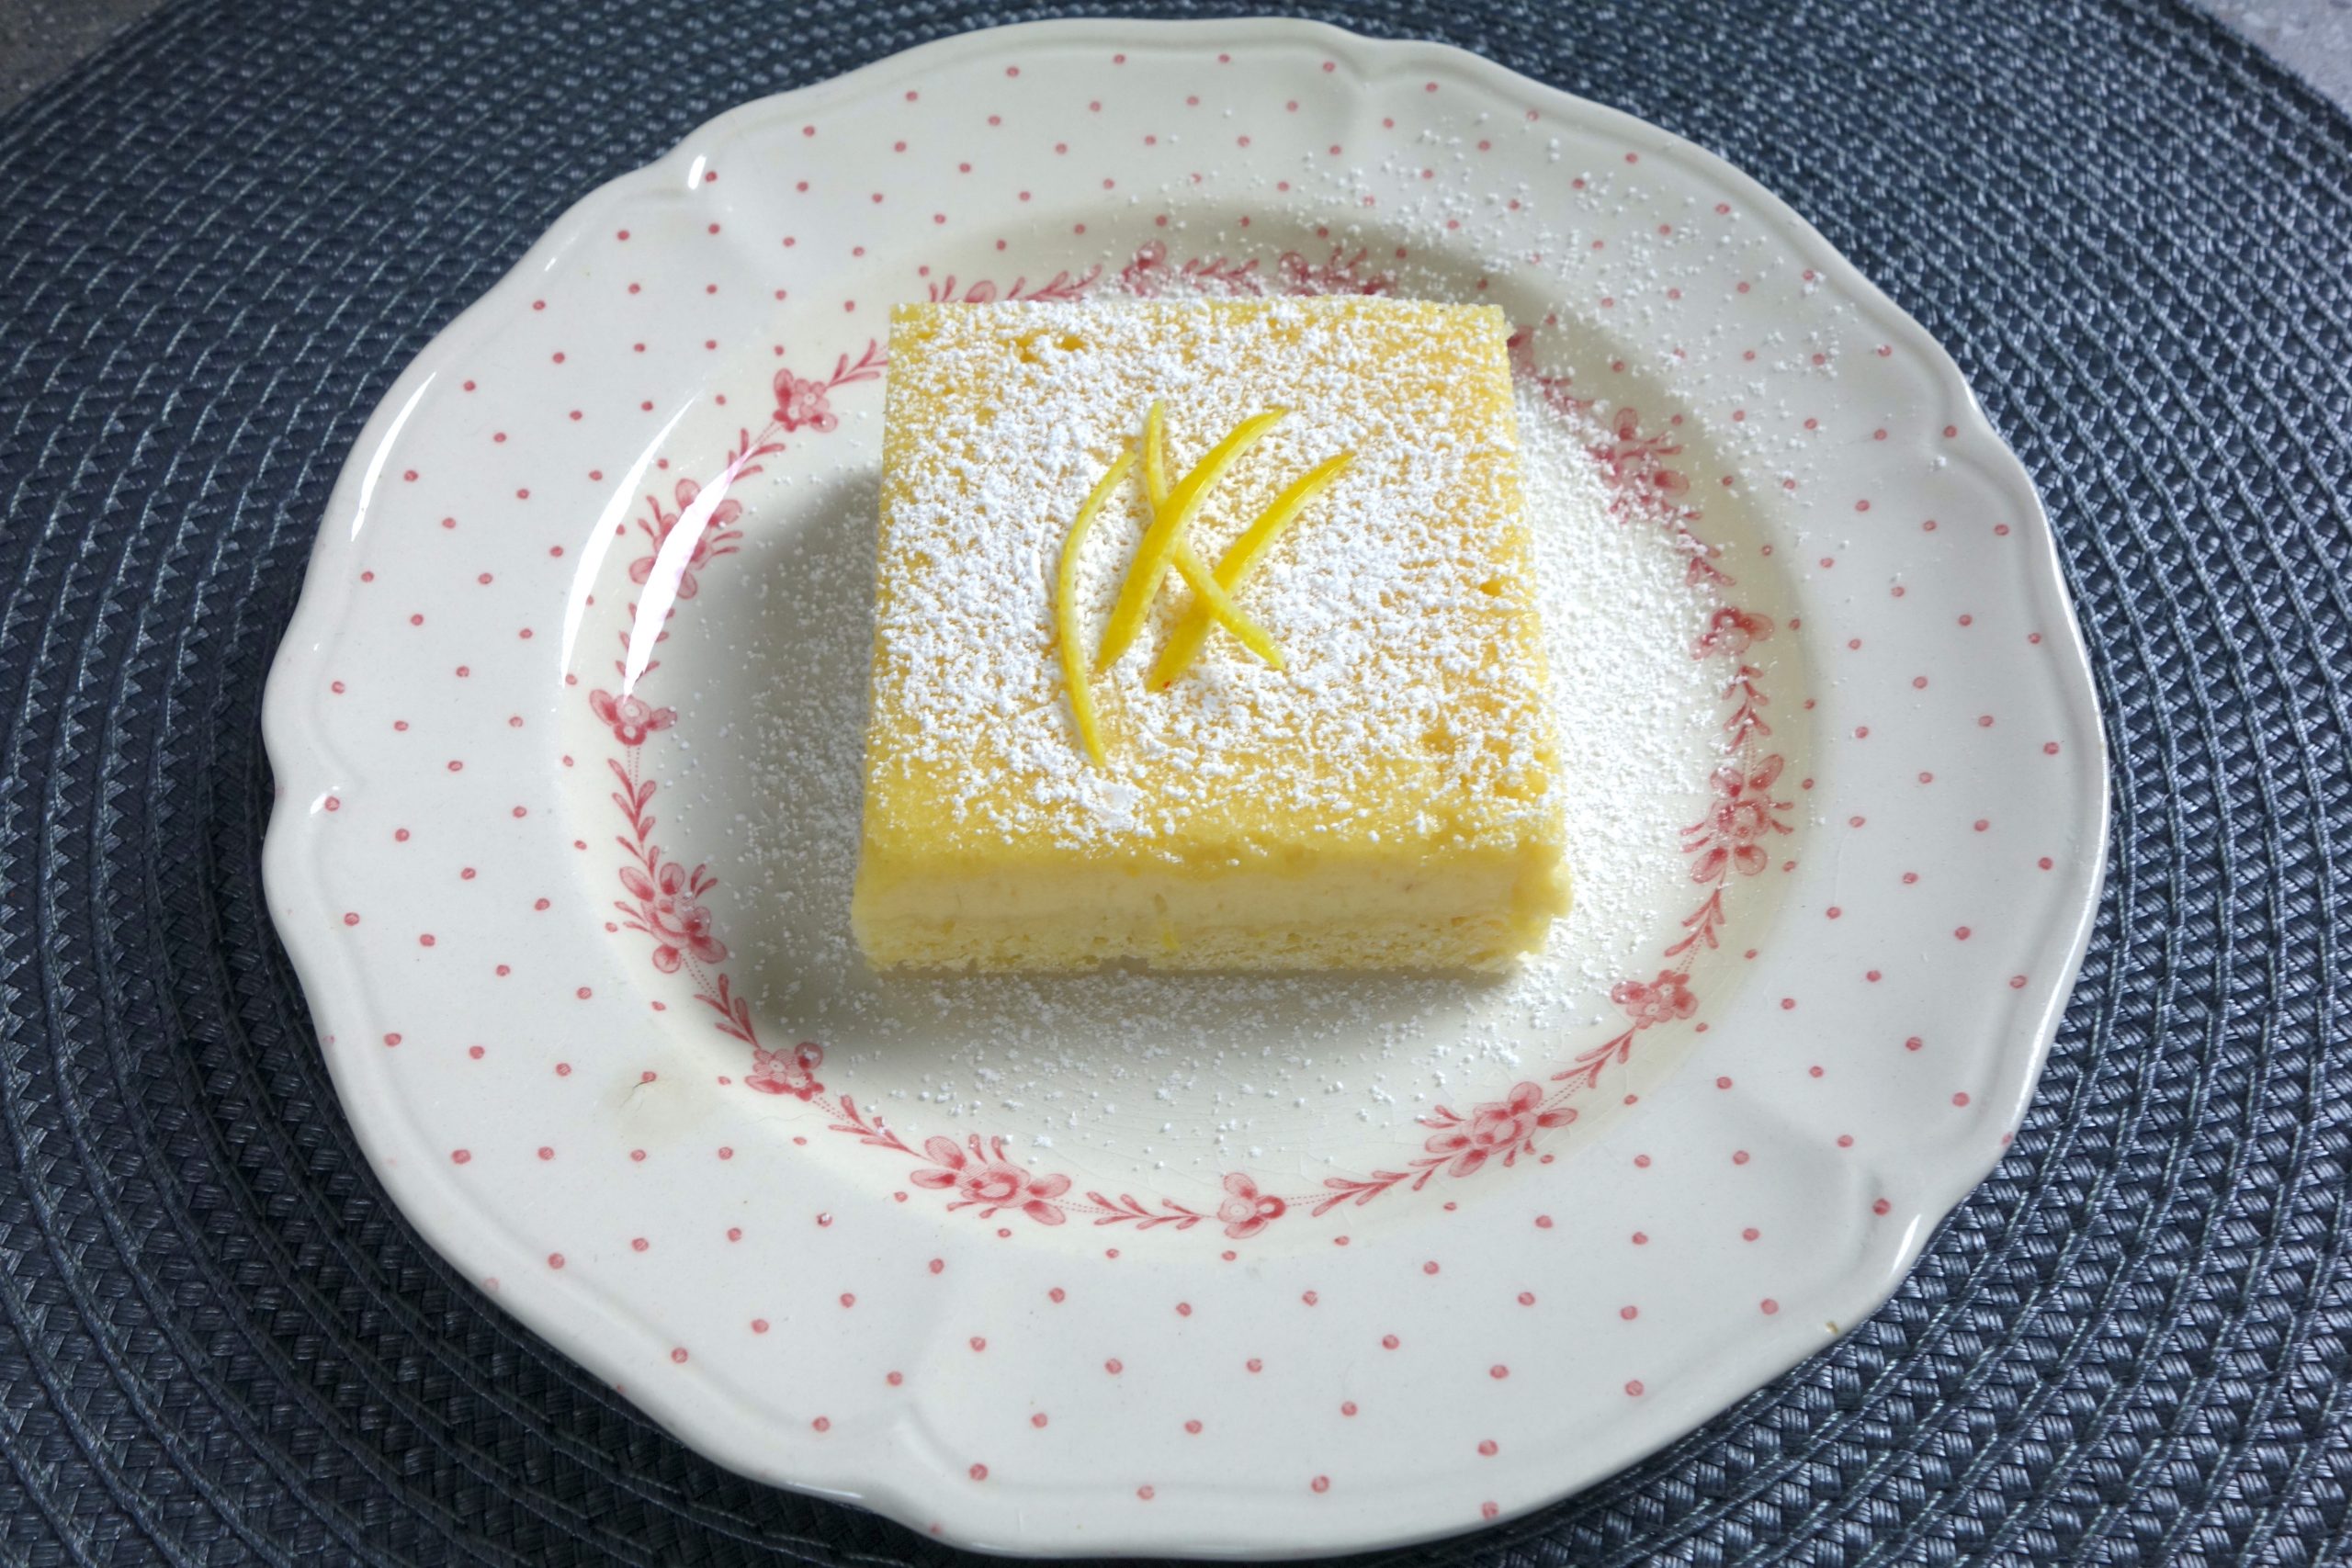 lemon and almond slice on a floral pattern plate